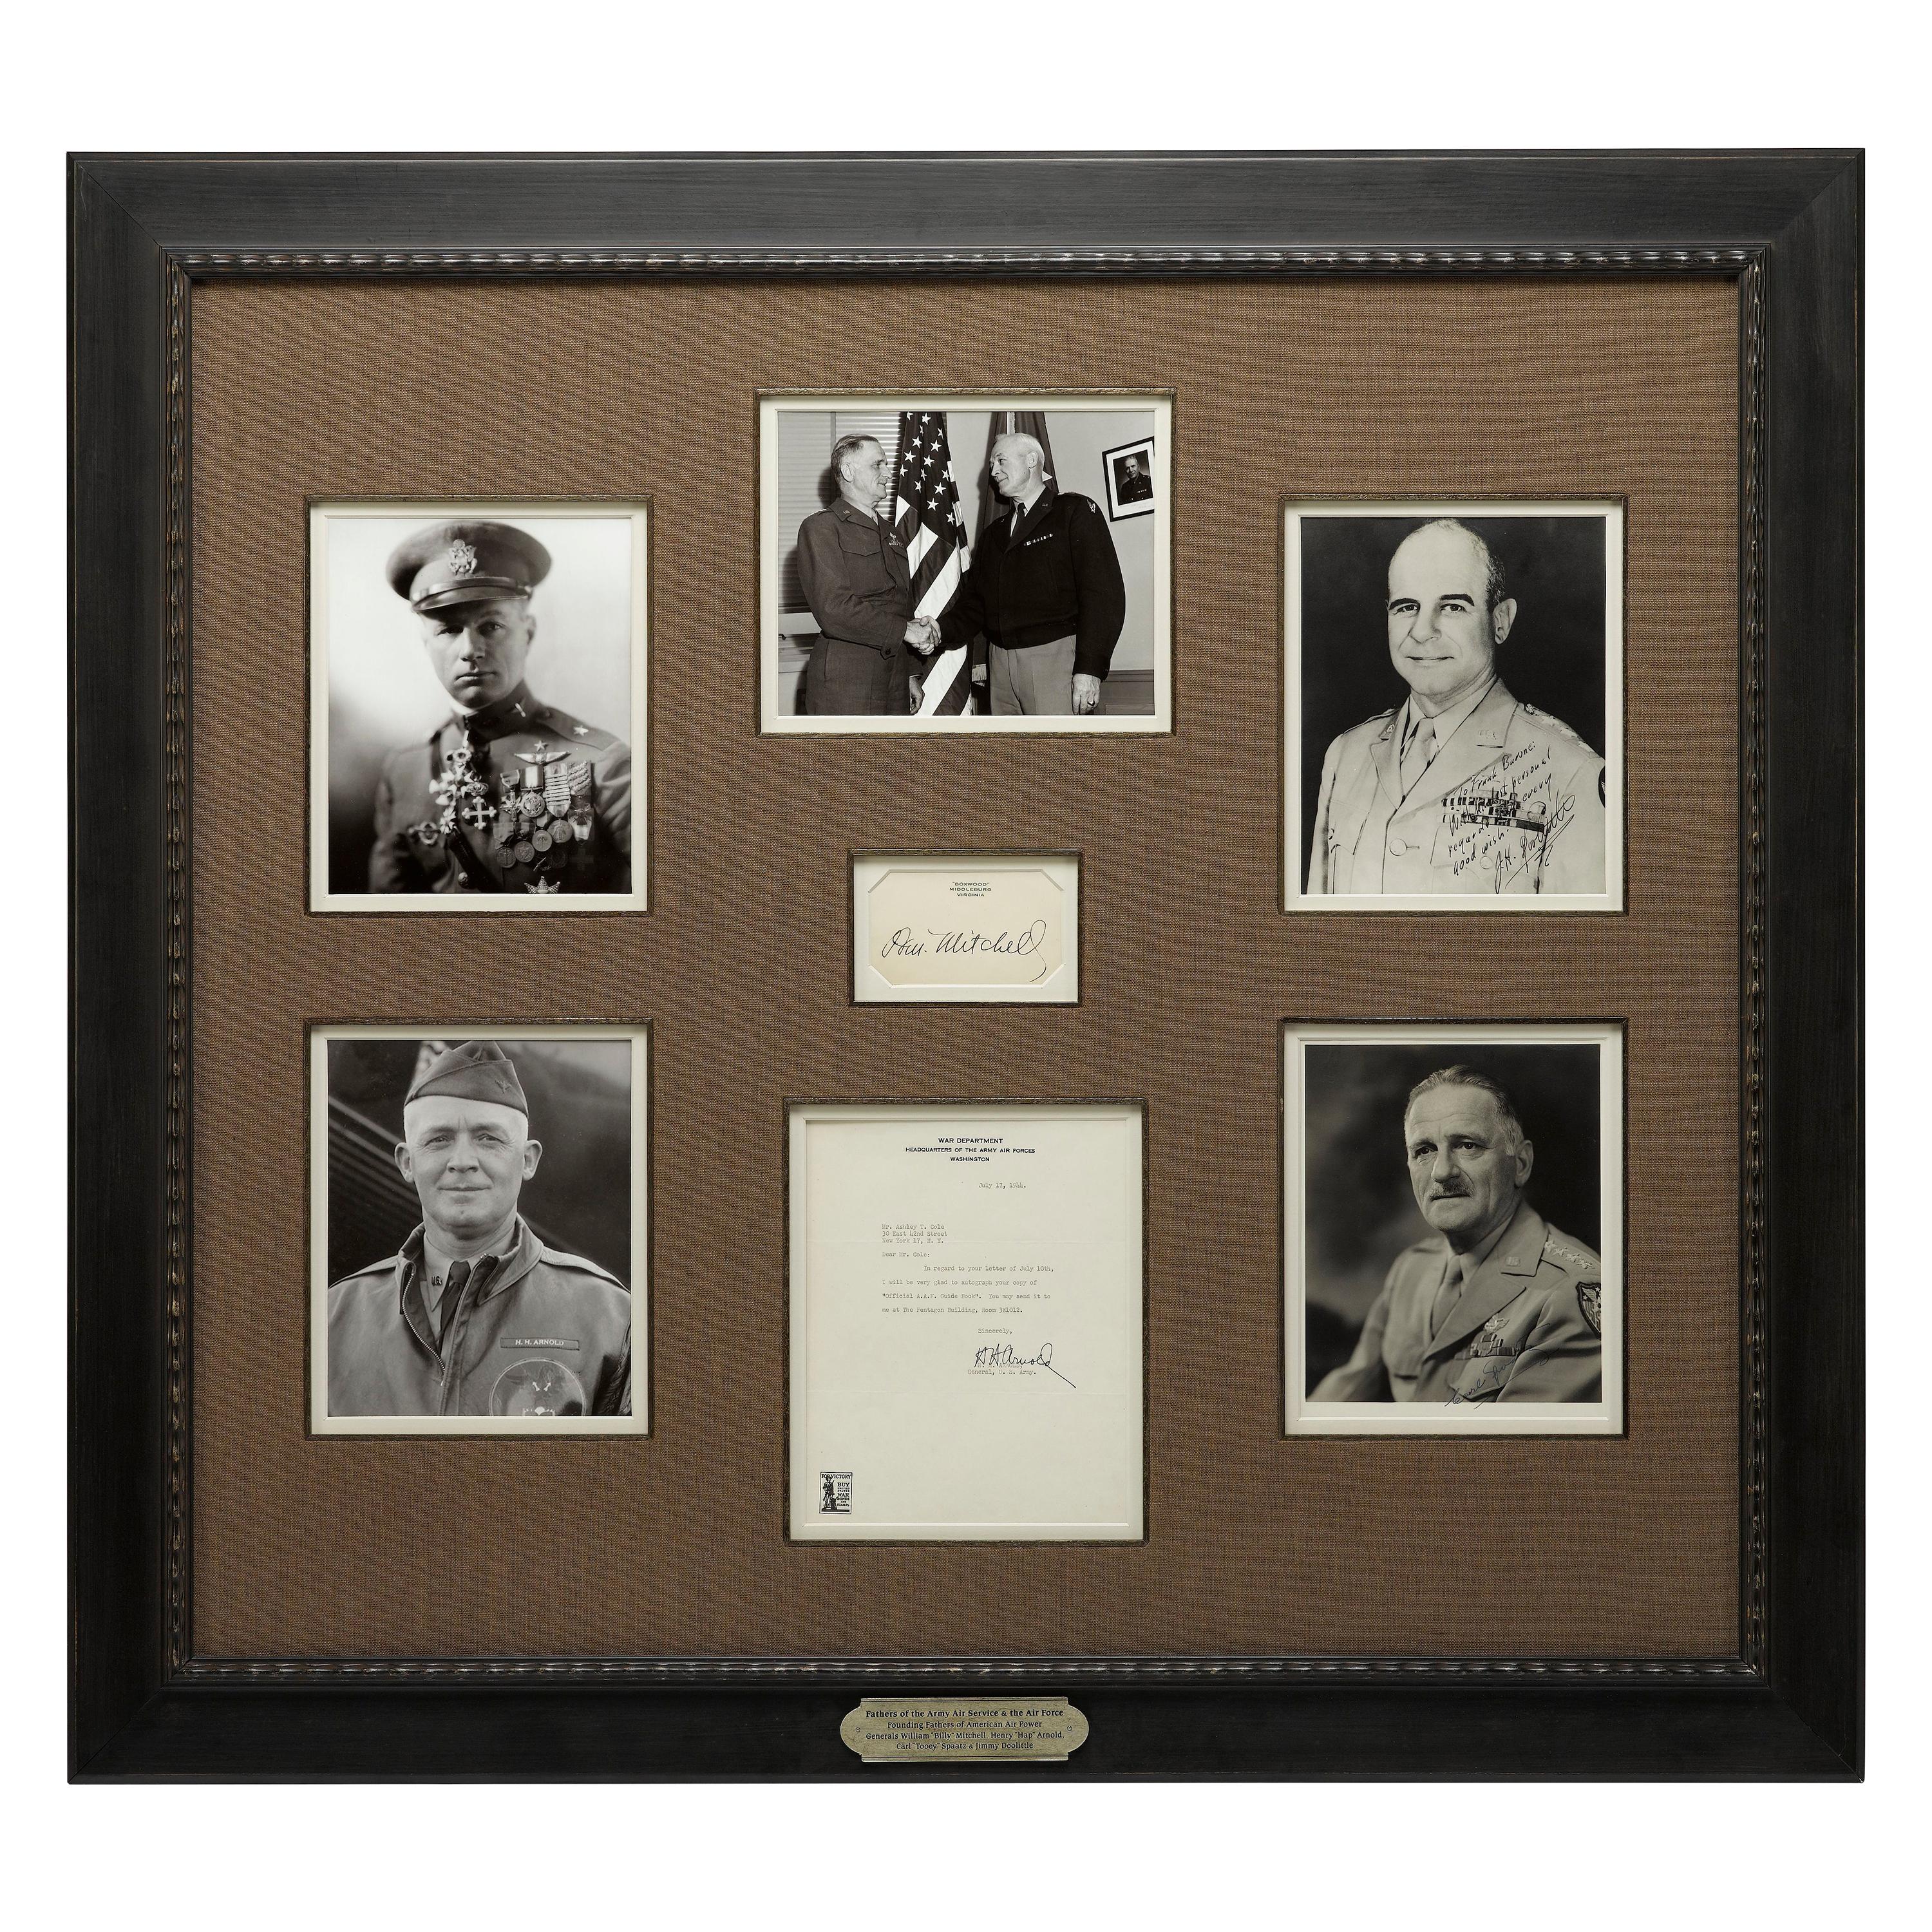 Fathers of the Air Service Authentic Signature Collage, circa 1926-1993